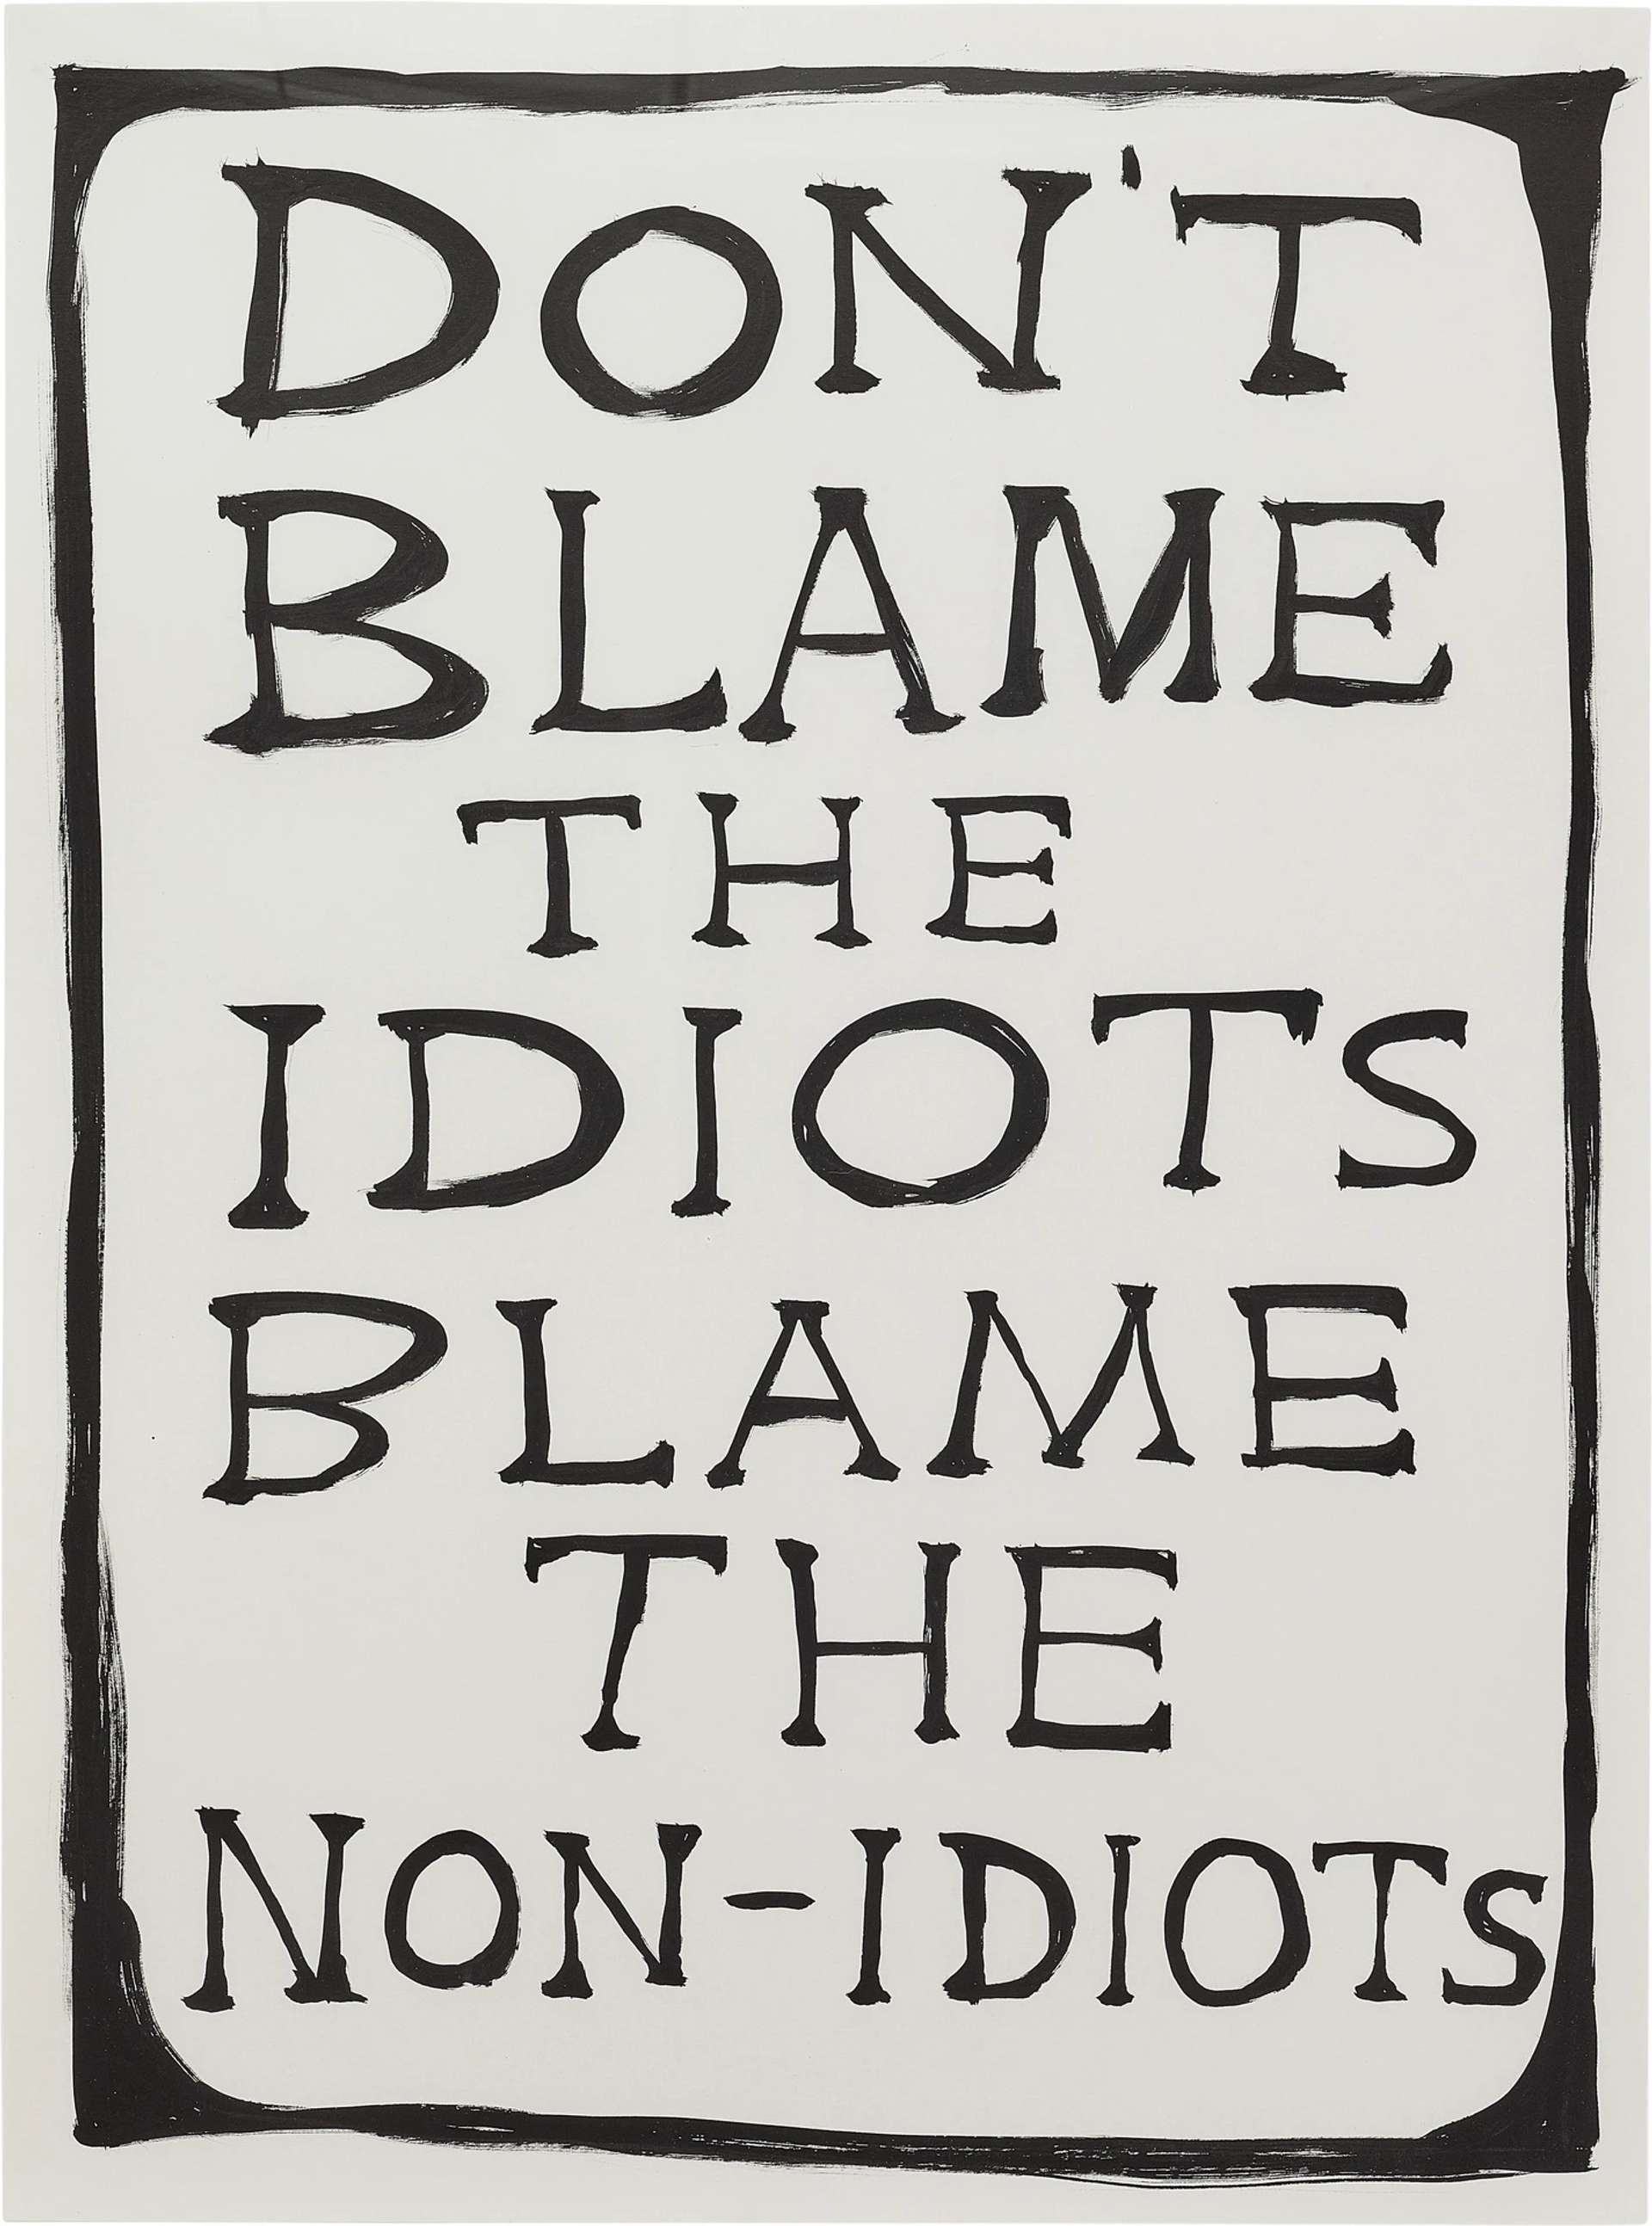 David Shrigley’s Untitled (Don’t Blame The Idiots) print. An image with large text that reads “don’t blame the idiots blame the non-idiots. It has a black border with exaggerated corners at the perimeter. 